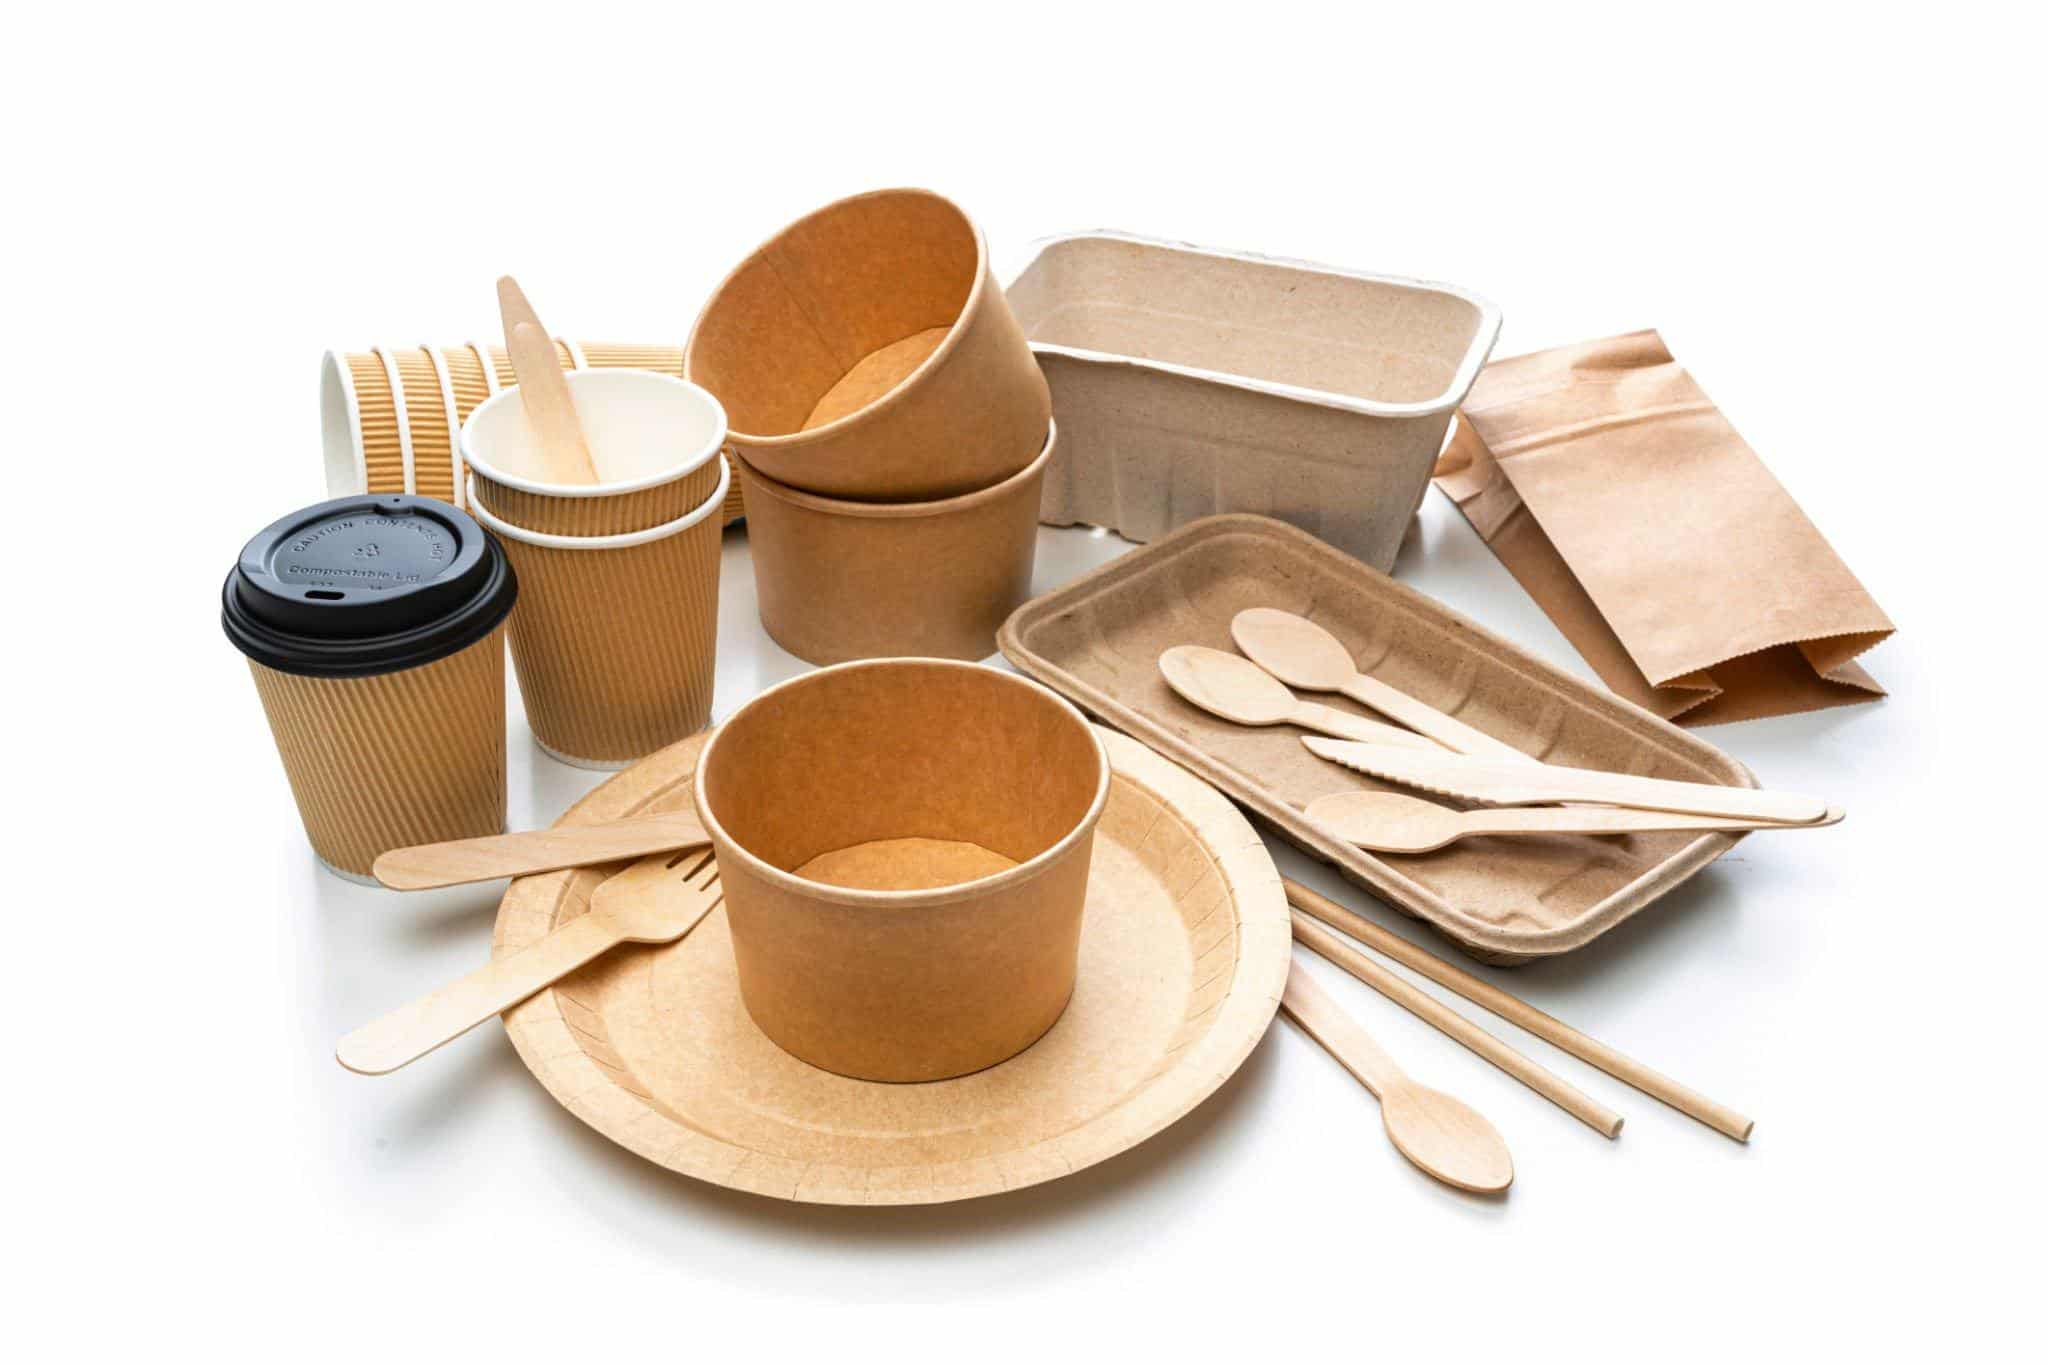 Biodegradable Materials and Products Supplier - Fancyco